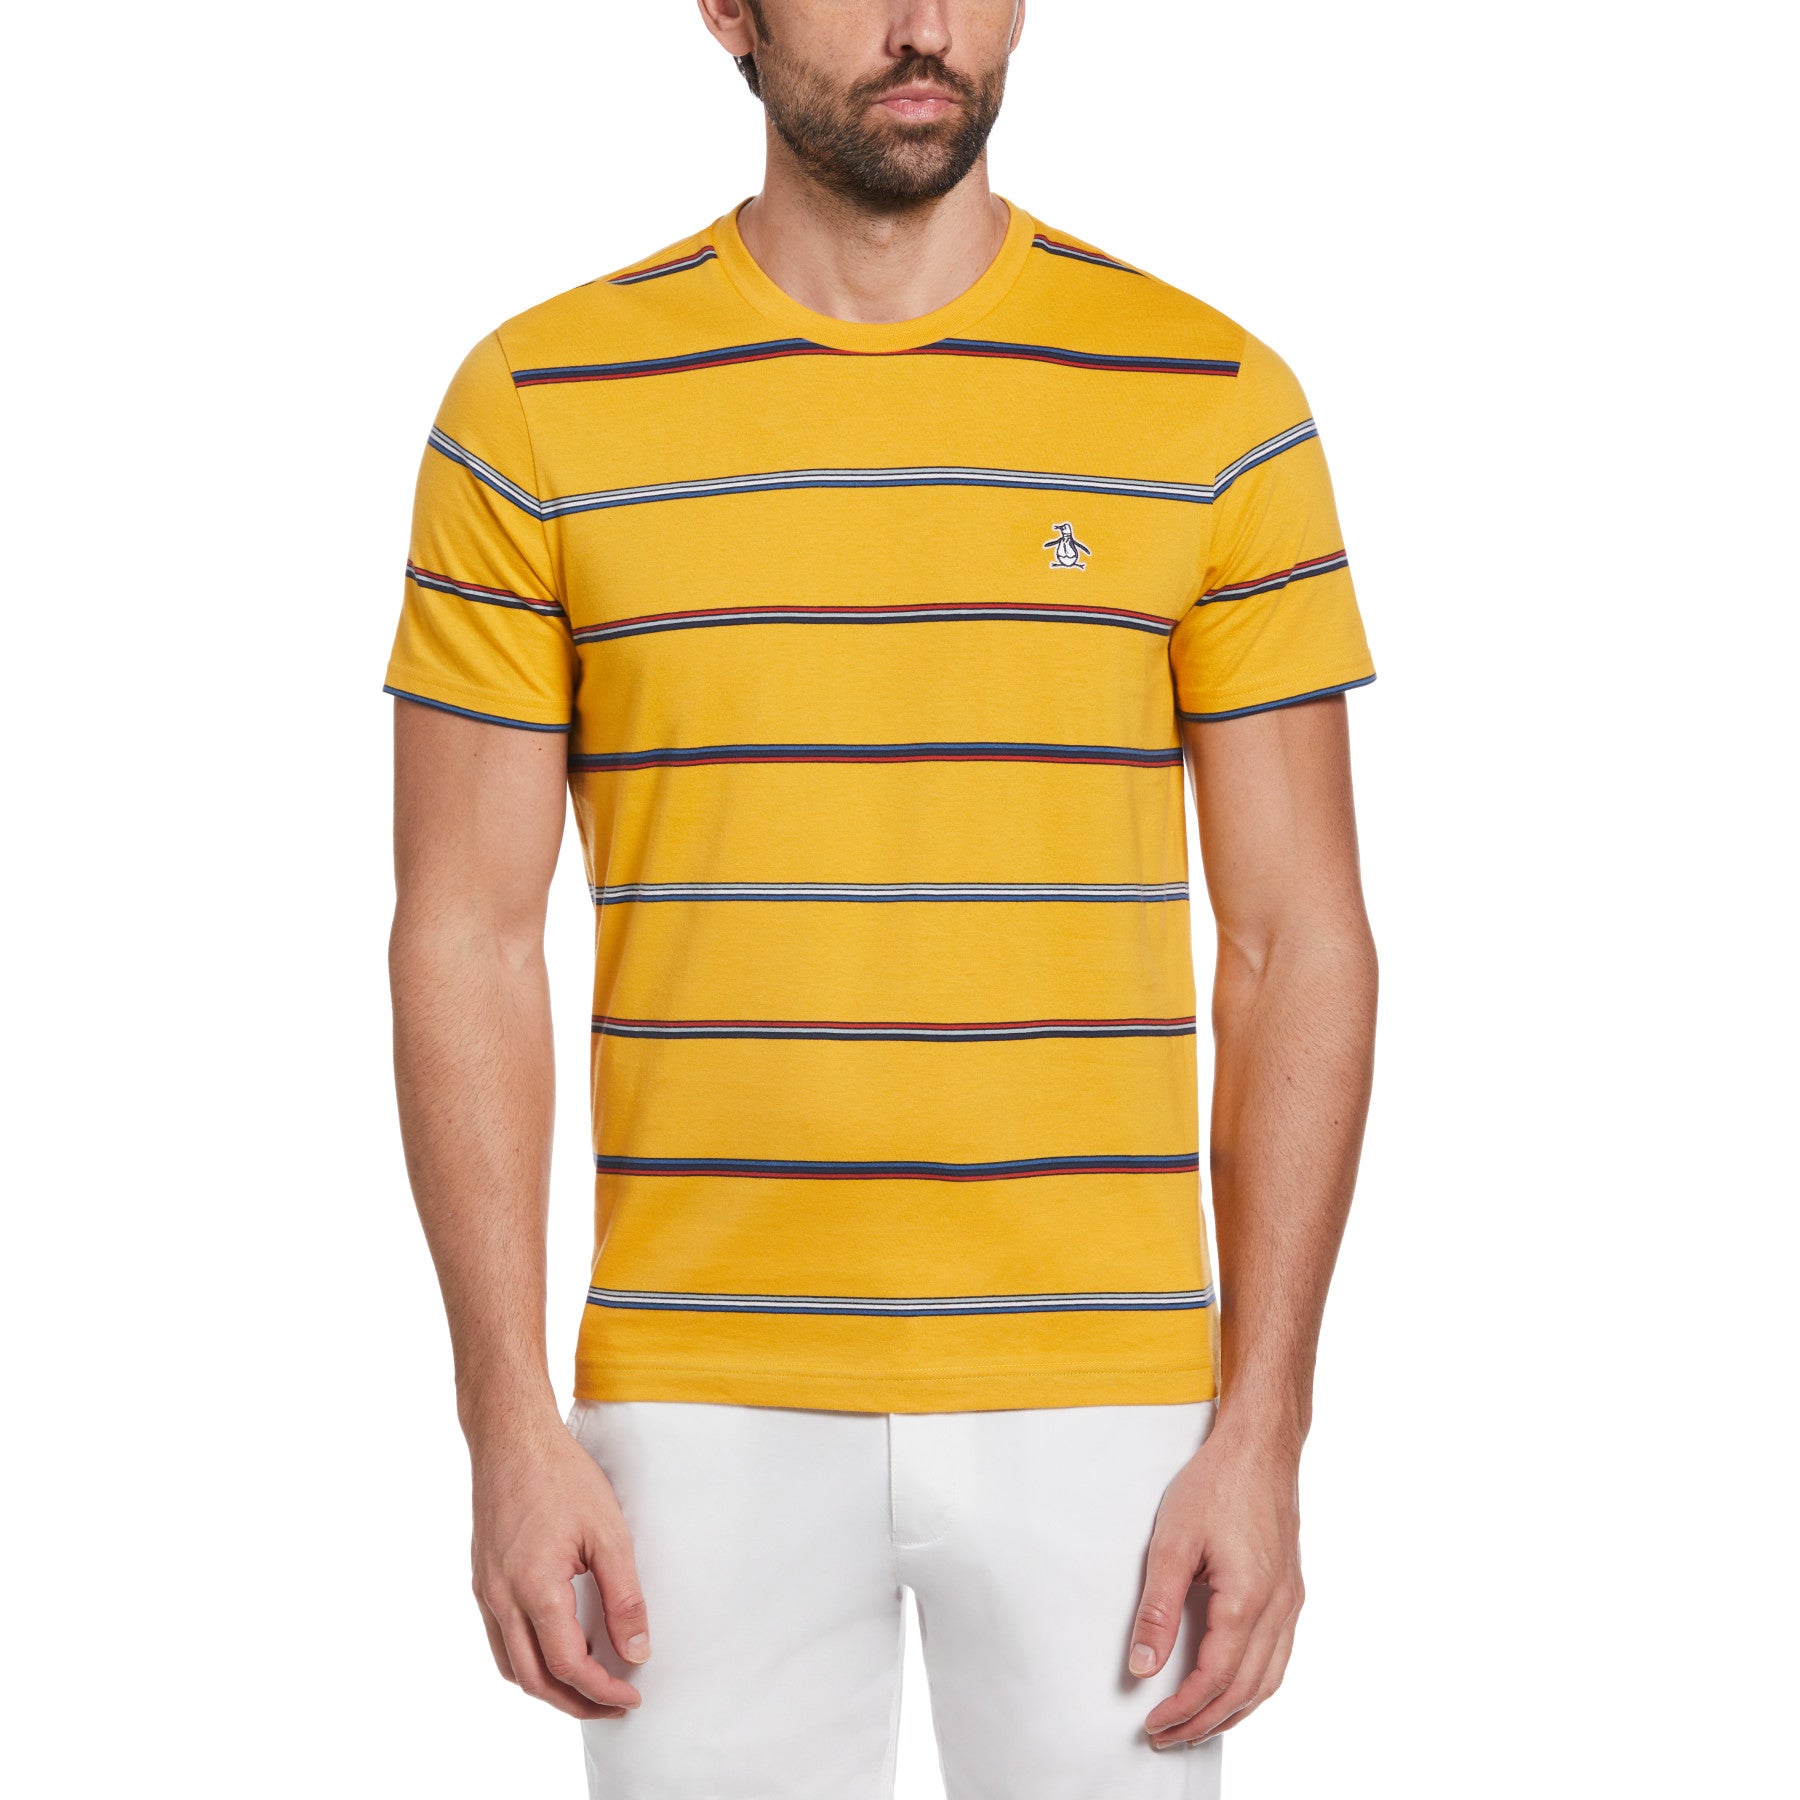 View Slim Fit Jersey Stripe TShirt In Mineral Yellow information